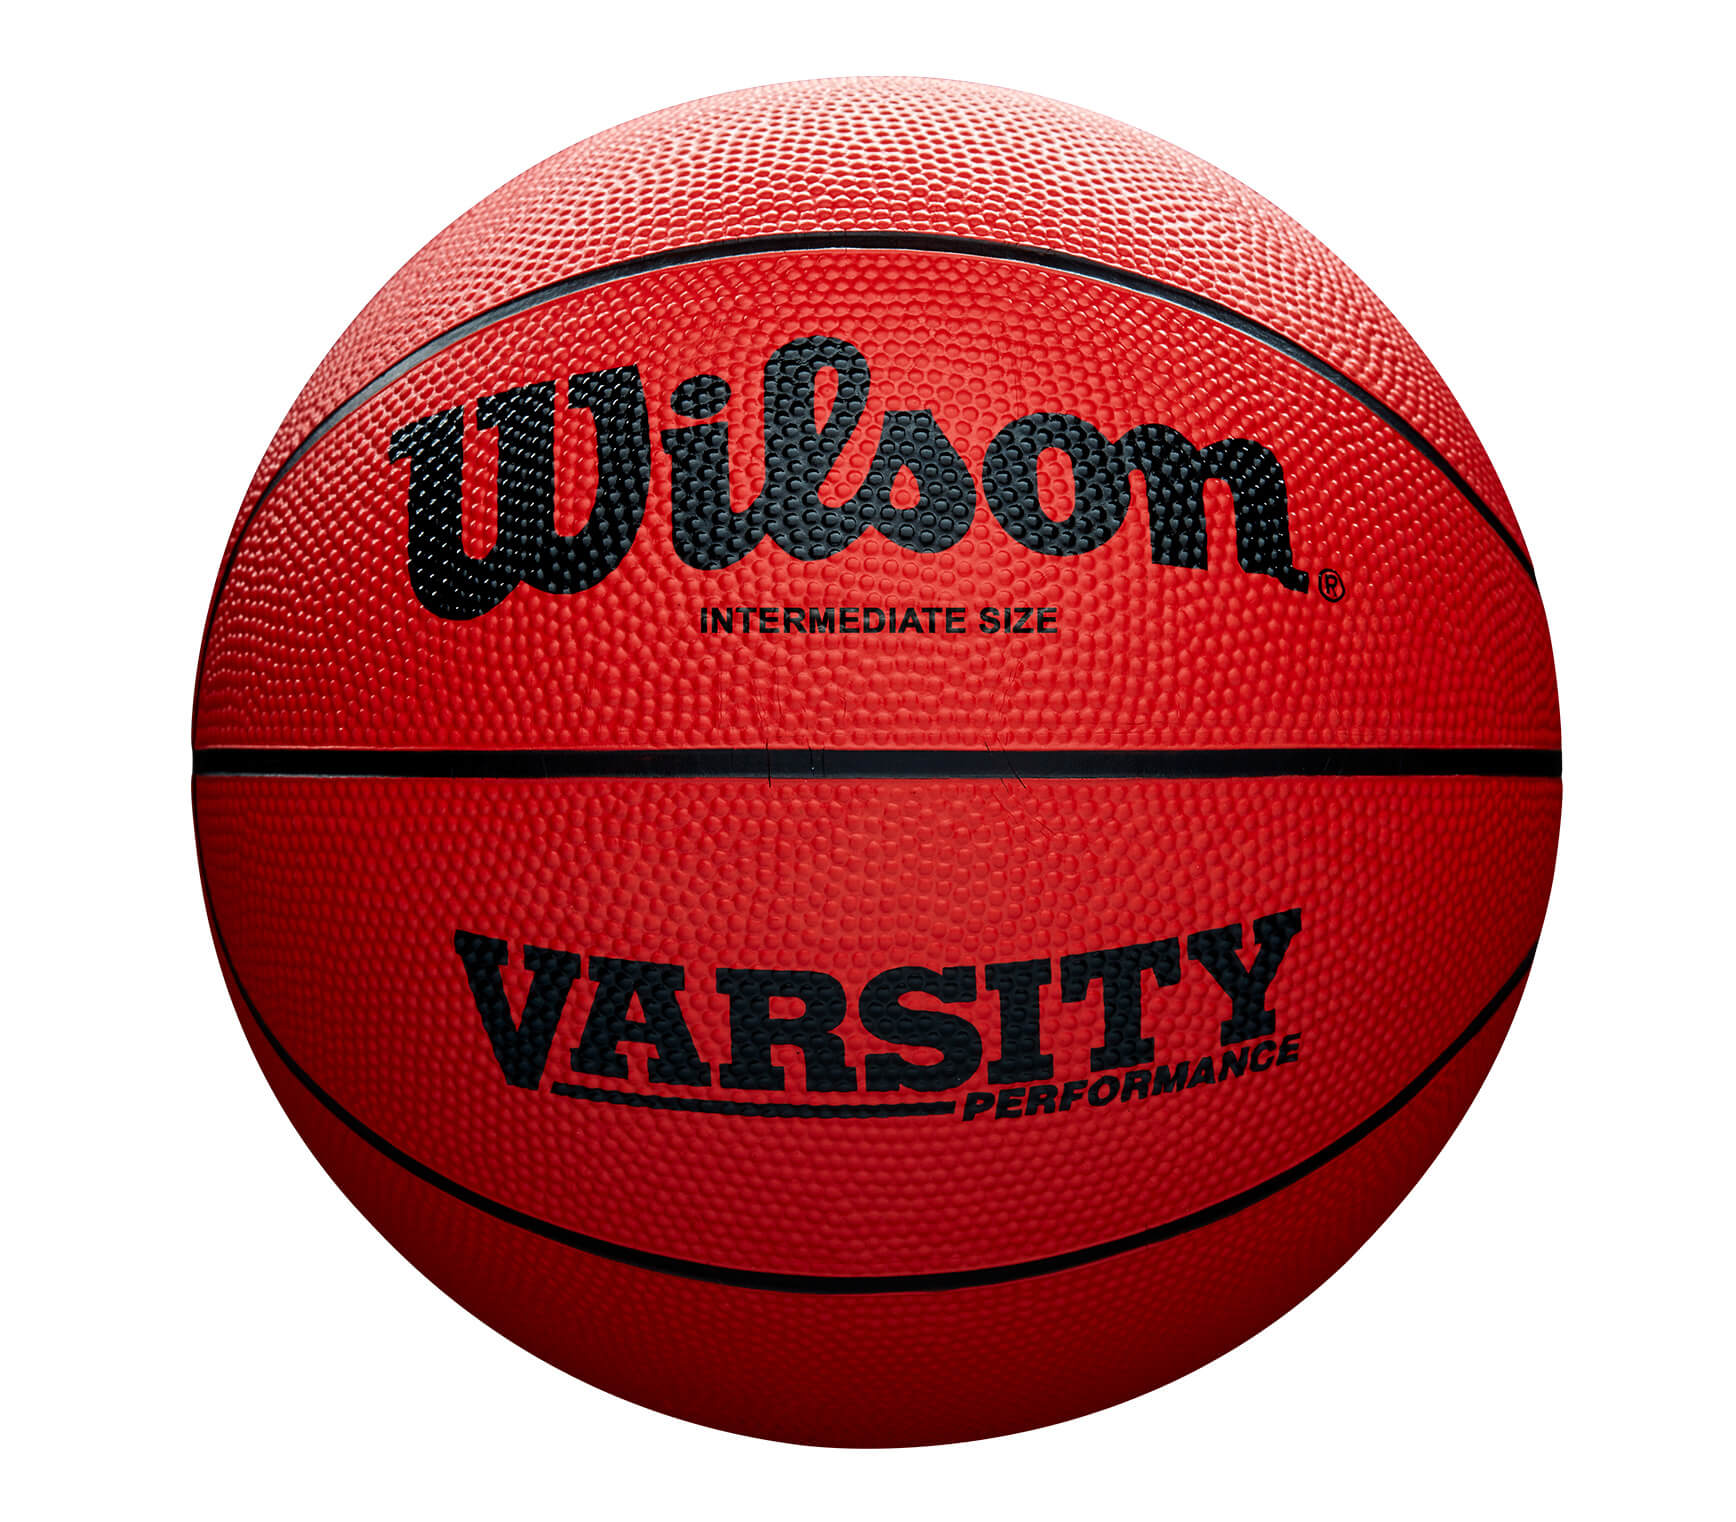 Wilson Varsity Rubber Basketball - Size 6 - Basketball - Discontinued